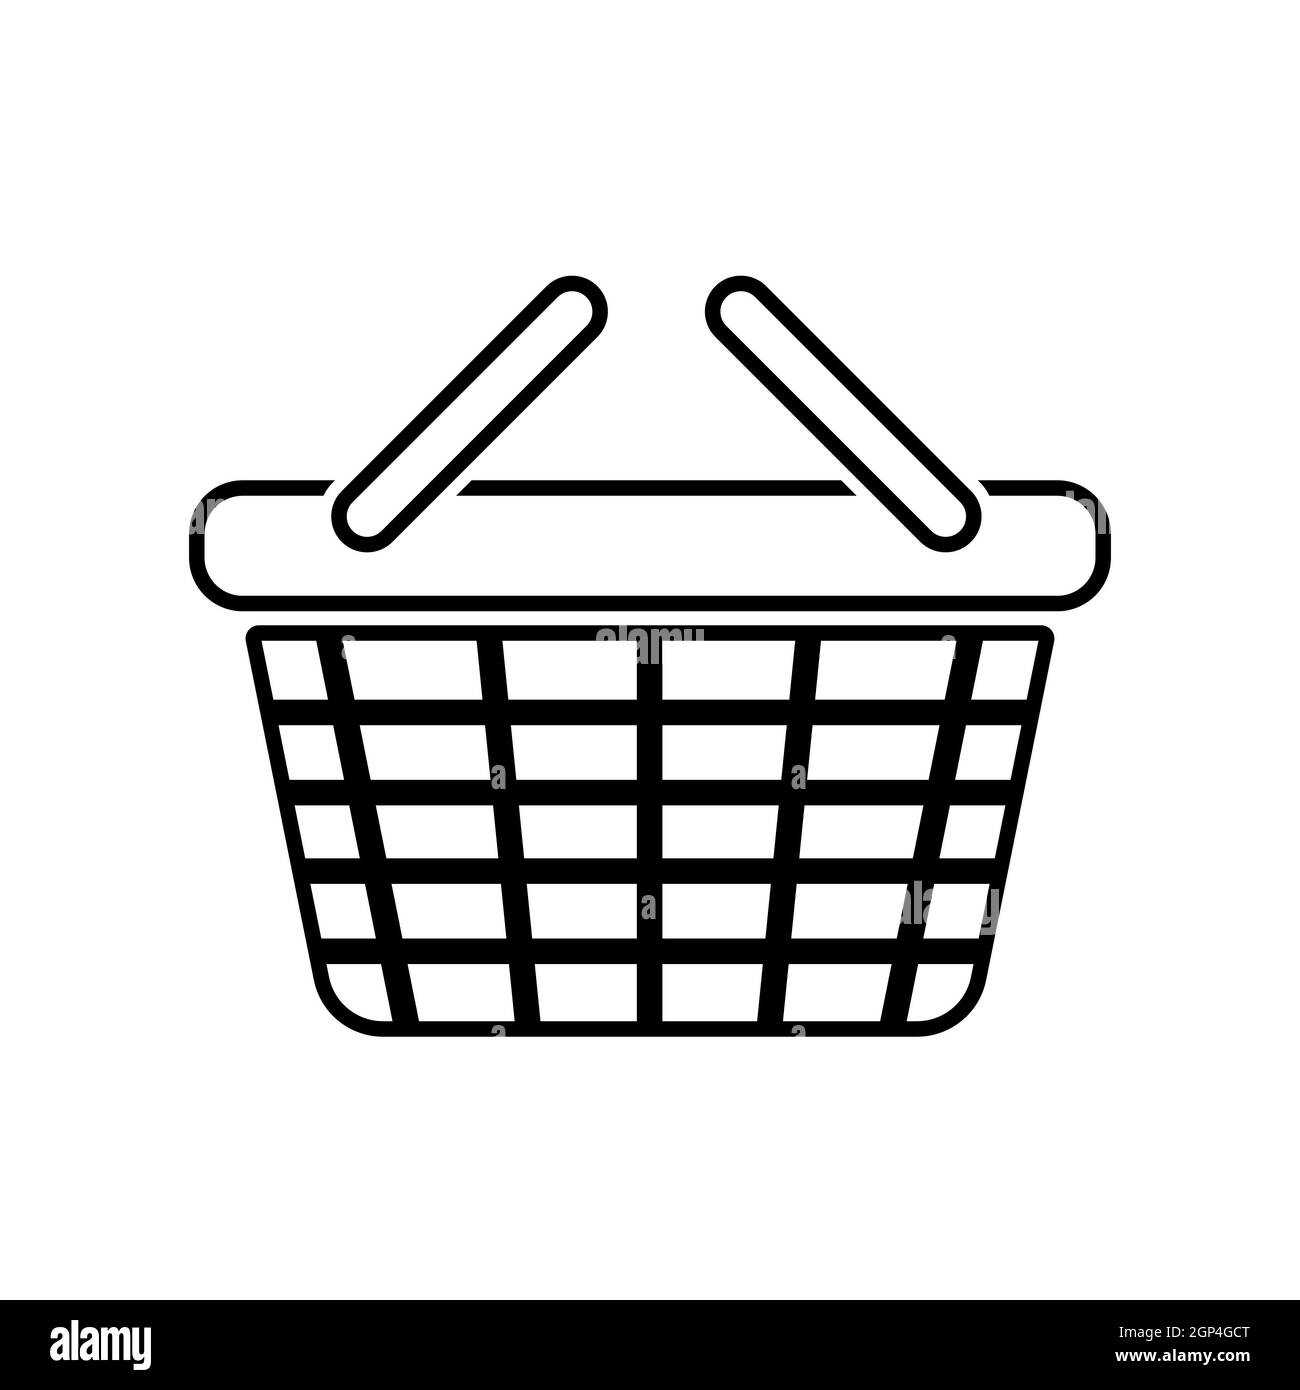 Abstract shopping cart for groceries from the supermarket - Vector illustration Stock Photo